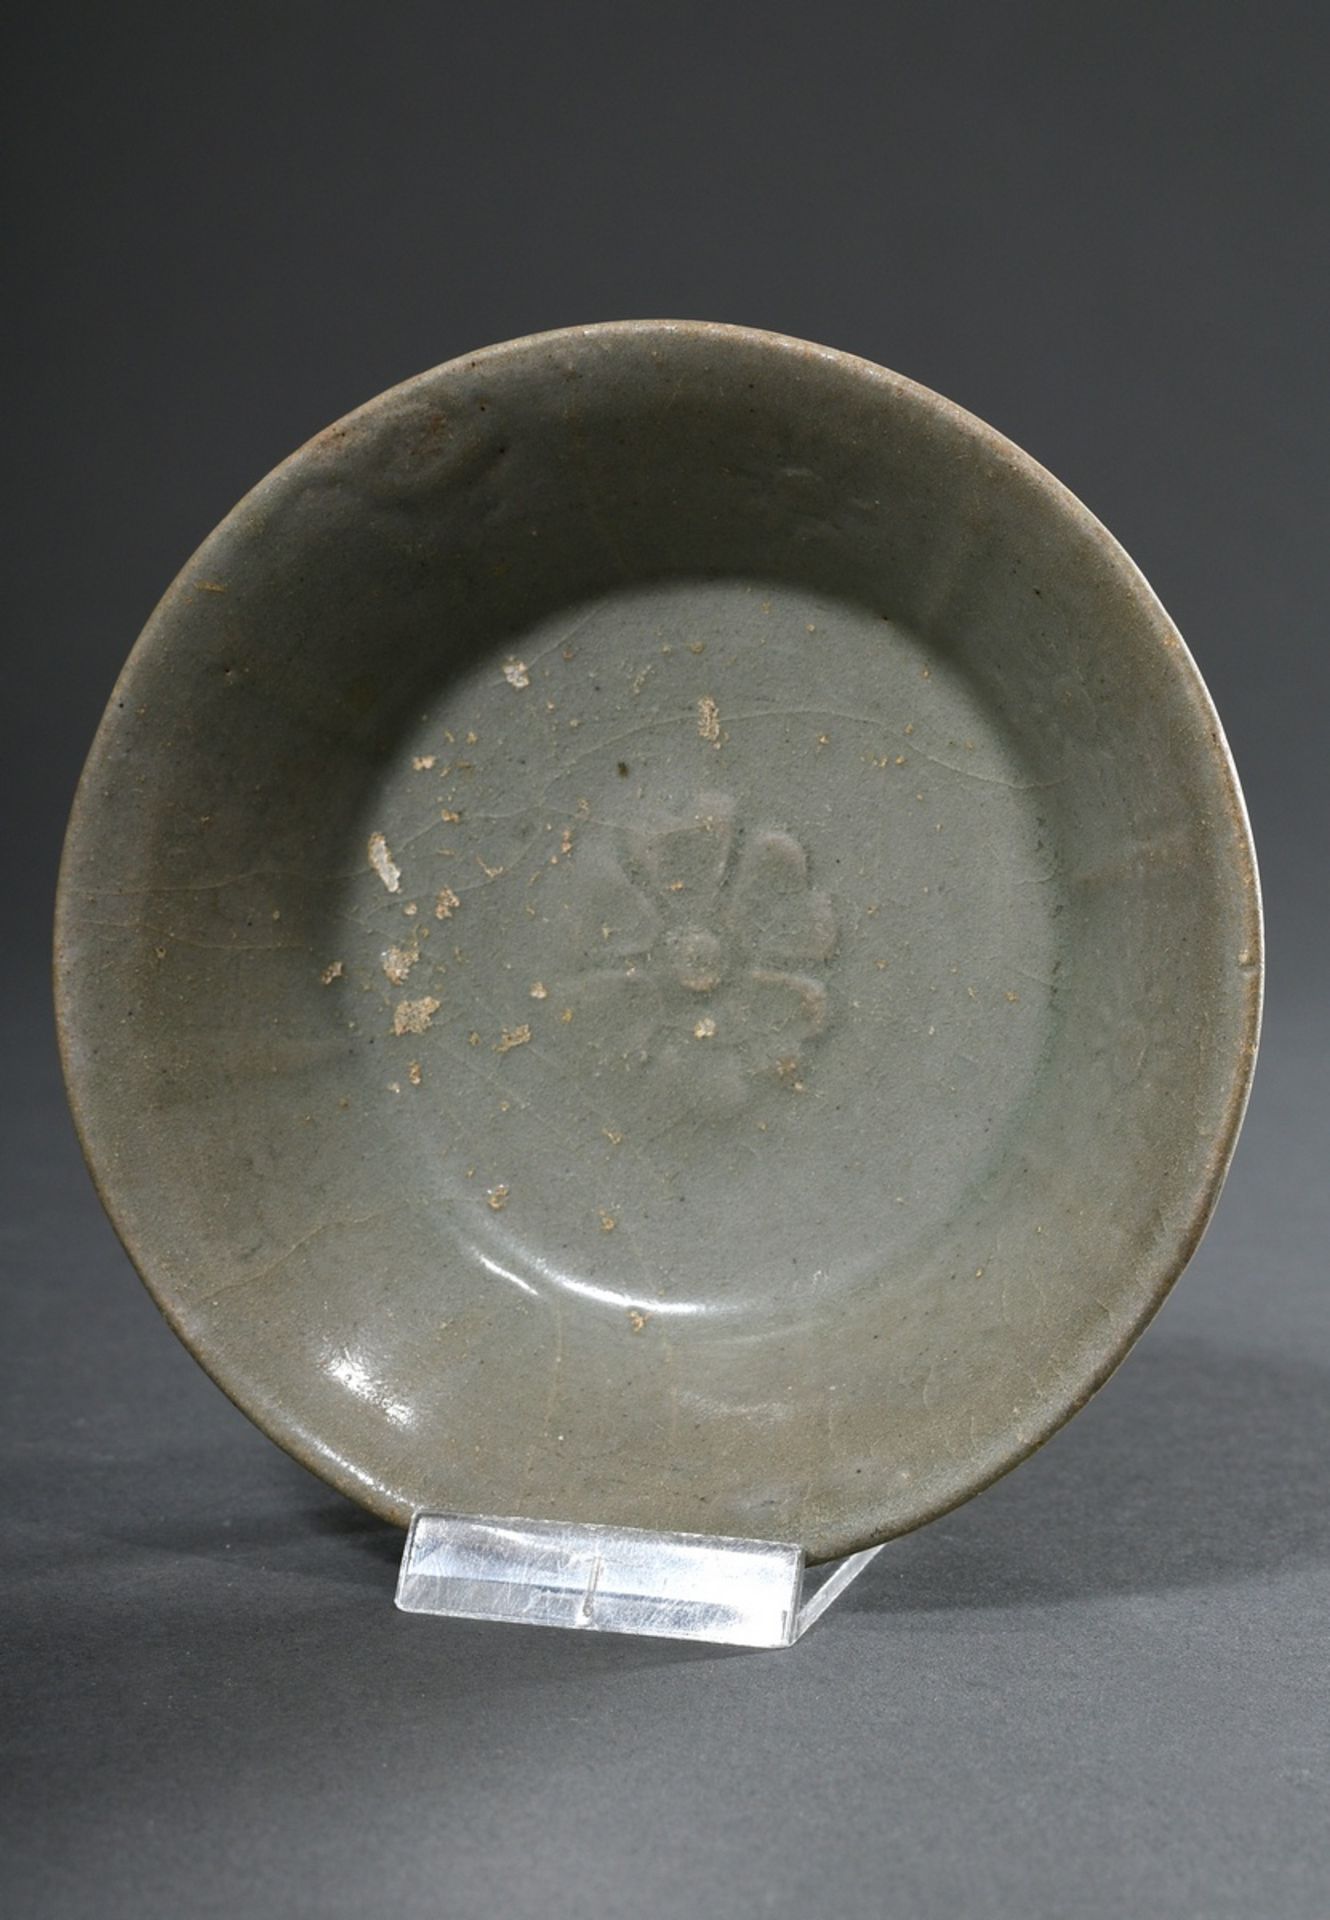 Small bowl with celadon glaze and modelled floral decoration, Korea Joseon Dynasty, h. 3.7 Ø 12.8cm